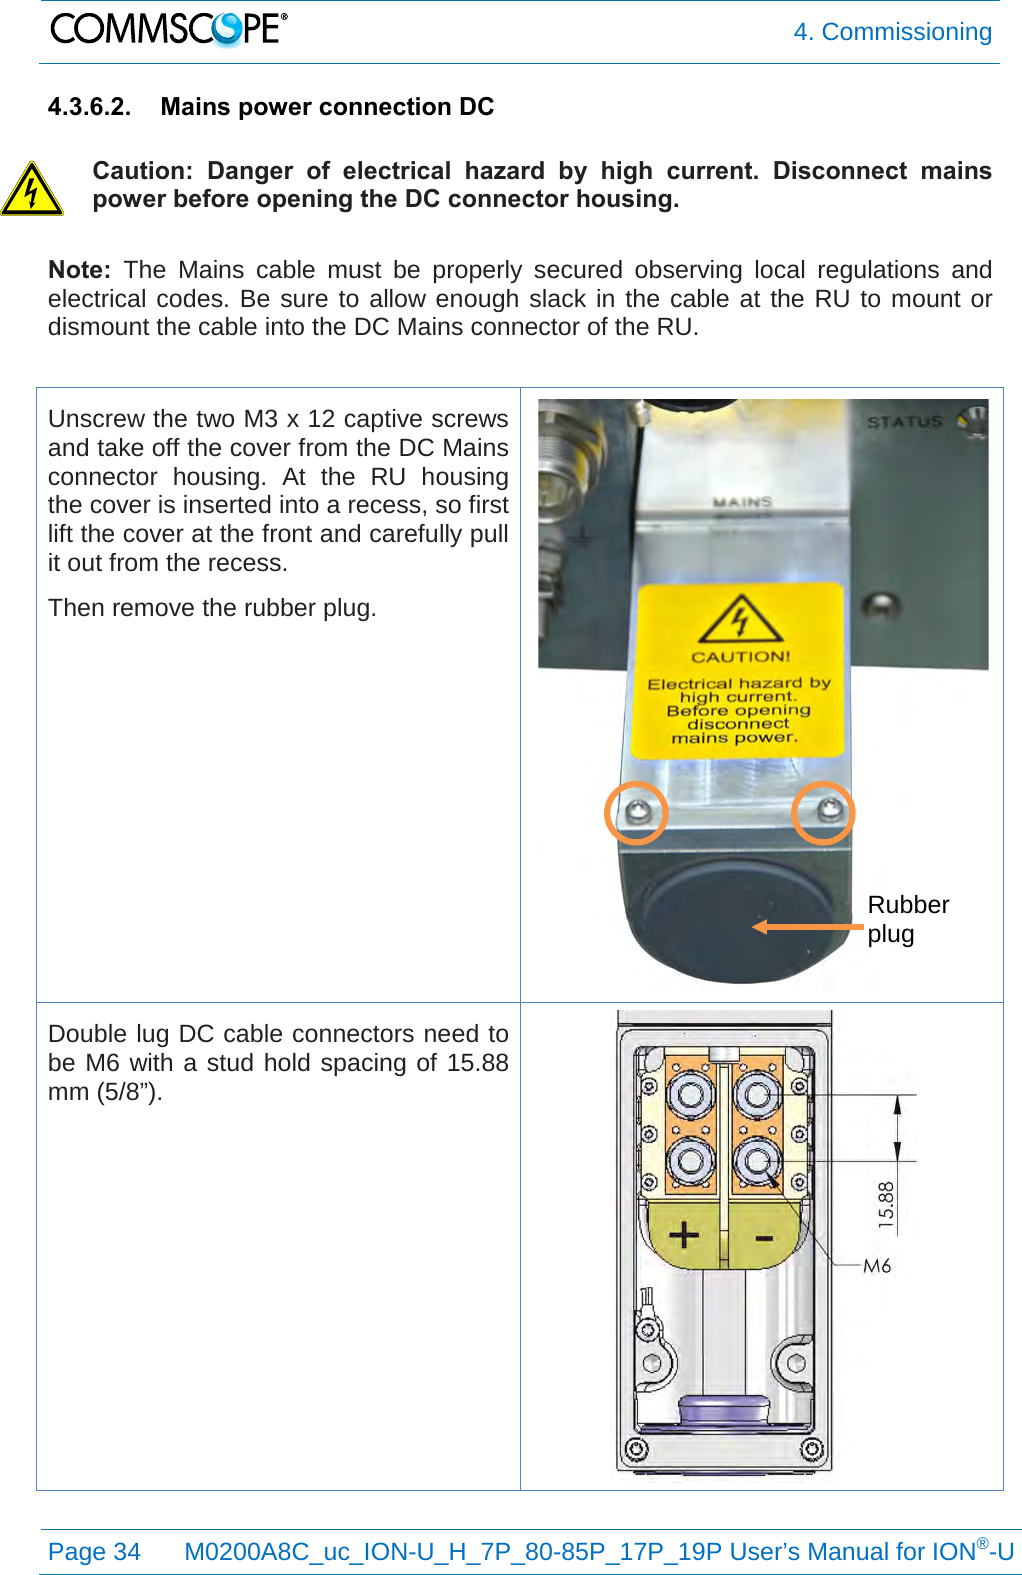  4. Commissioning  Page 34 M0200A8C_uc_ION-U_H_7P_80-85P_17P_19P User’s Manual for ION®-U  4.3.6.2. Mains power connection DC  Caution: Danger of electrical hazard by high current.  Disconnect mains power before opening the DC connector housing. Note: The Mains cable must be properly secured observing local regulations and electrical codes. Be sure to allow enough slack in the cable at the RU to mount or dismount the cable into the DC Mains connector of the RU.  Unscrew the two M3 x 12 captive screws and take off the cover from the DC Mains connector housing. At the RU housing the cover is inserted into a recess, so first lift the cover at the front and carefully pull it out from the recess. Then remove the rubber plug.  Double lug DC cable connectors need to be M6 with a stud hold spacing of 15.88 mm (5/8”).     Rubber plug 